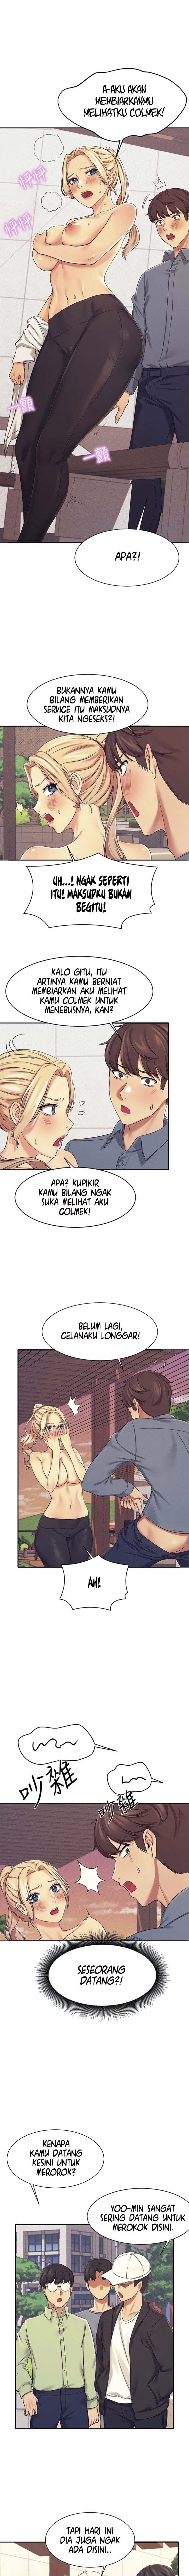 Baca Is There No Goddess in My College? Chapter 5  - GudangKomik